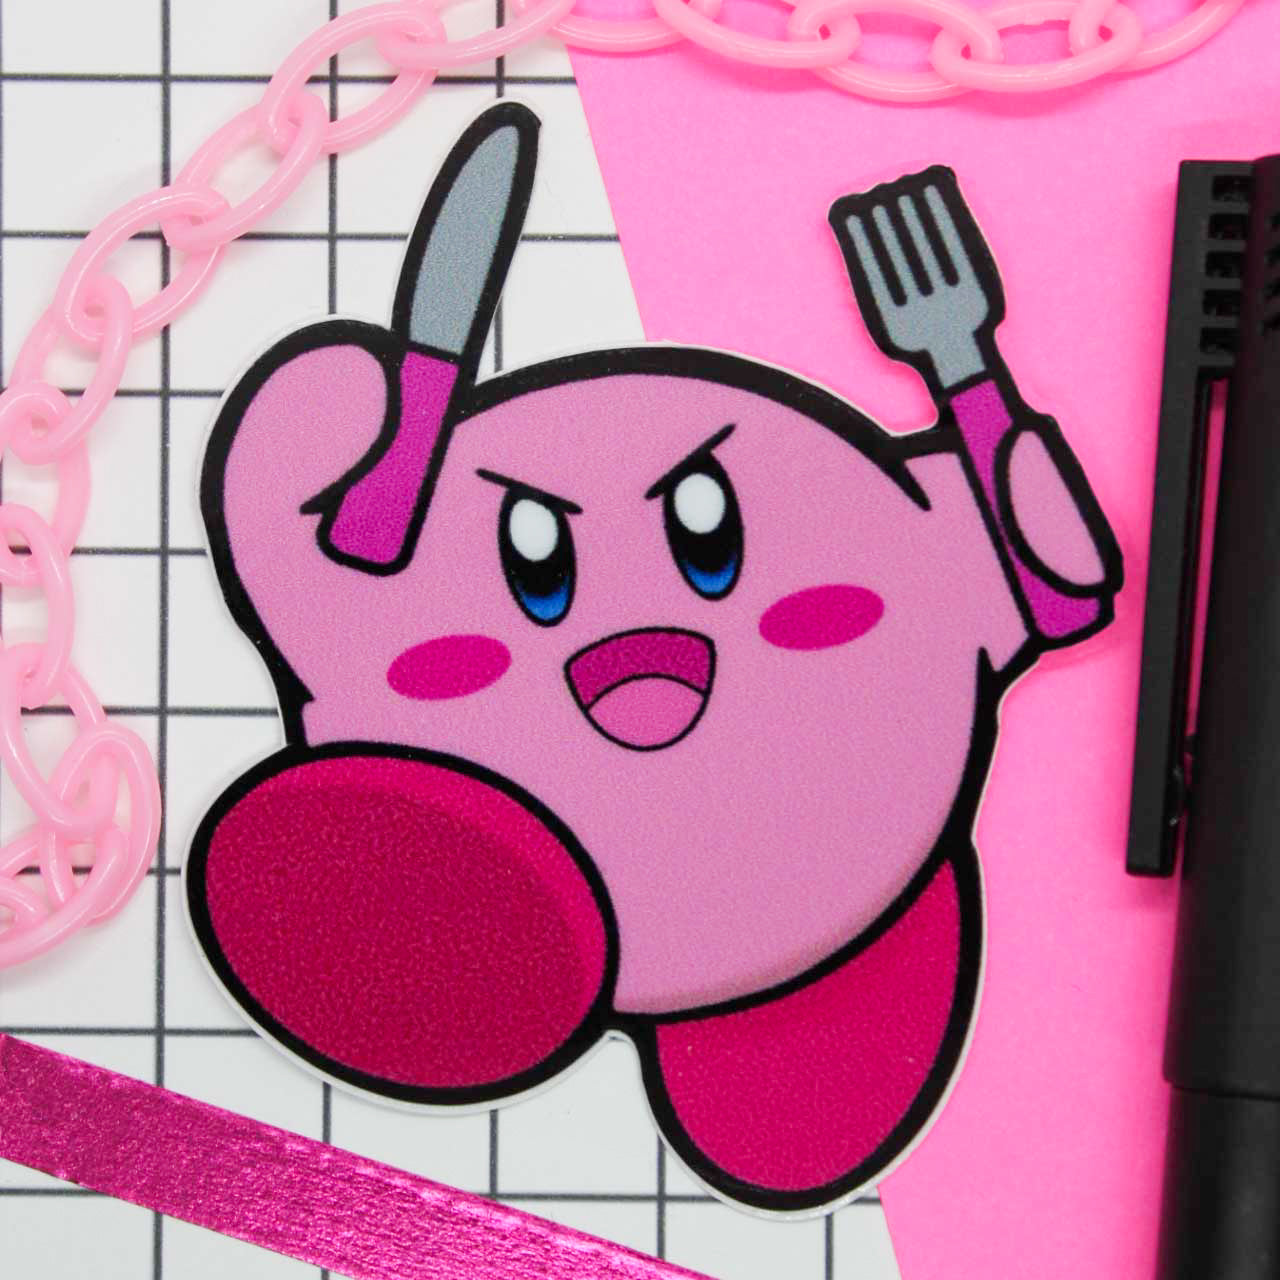 Kirby vinyl sticker, kirby holding a knife and fork. 